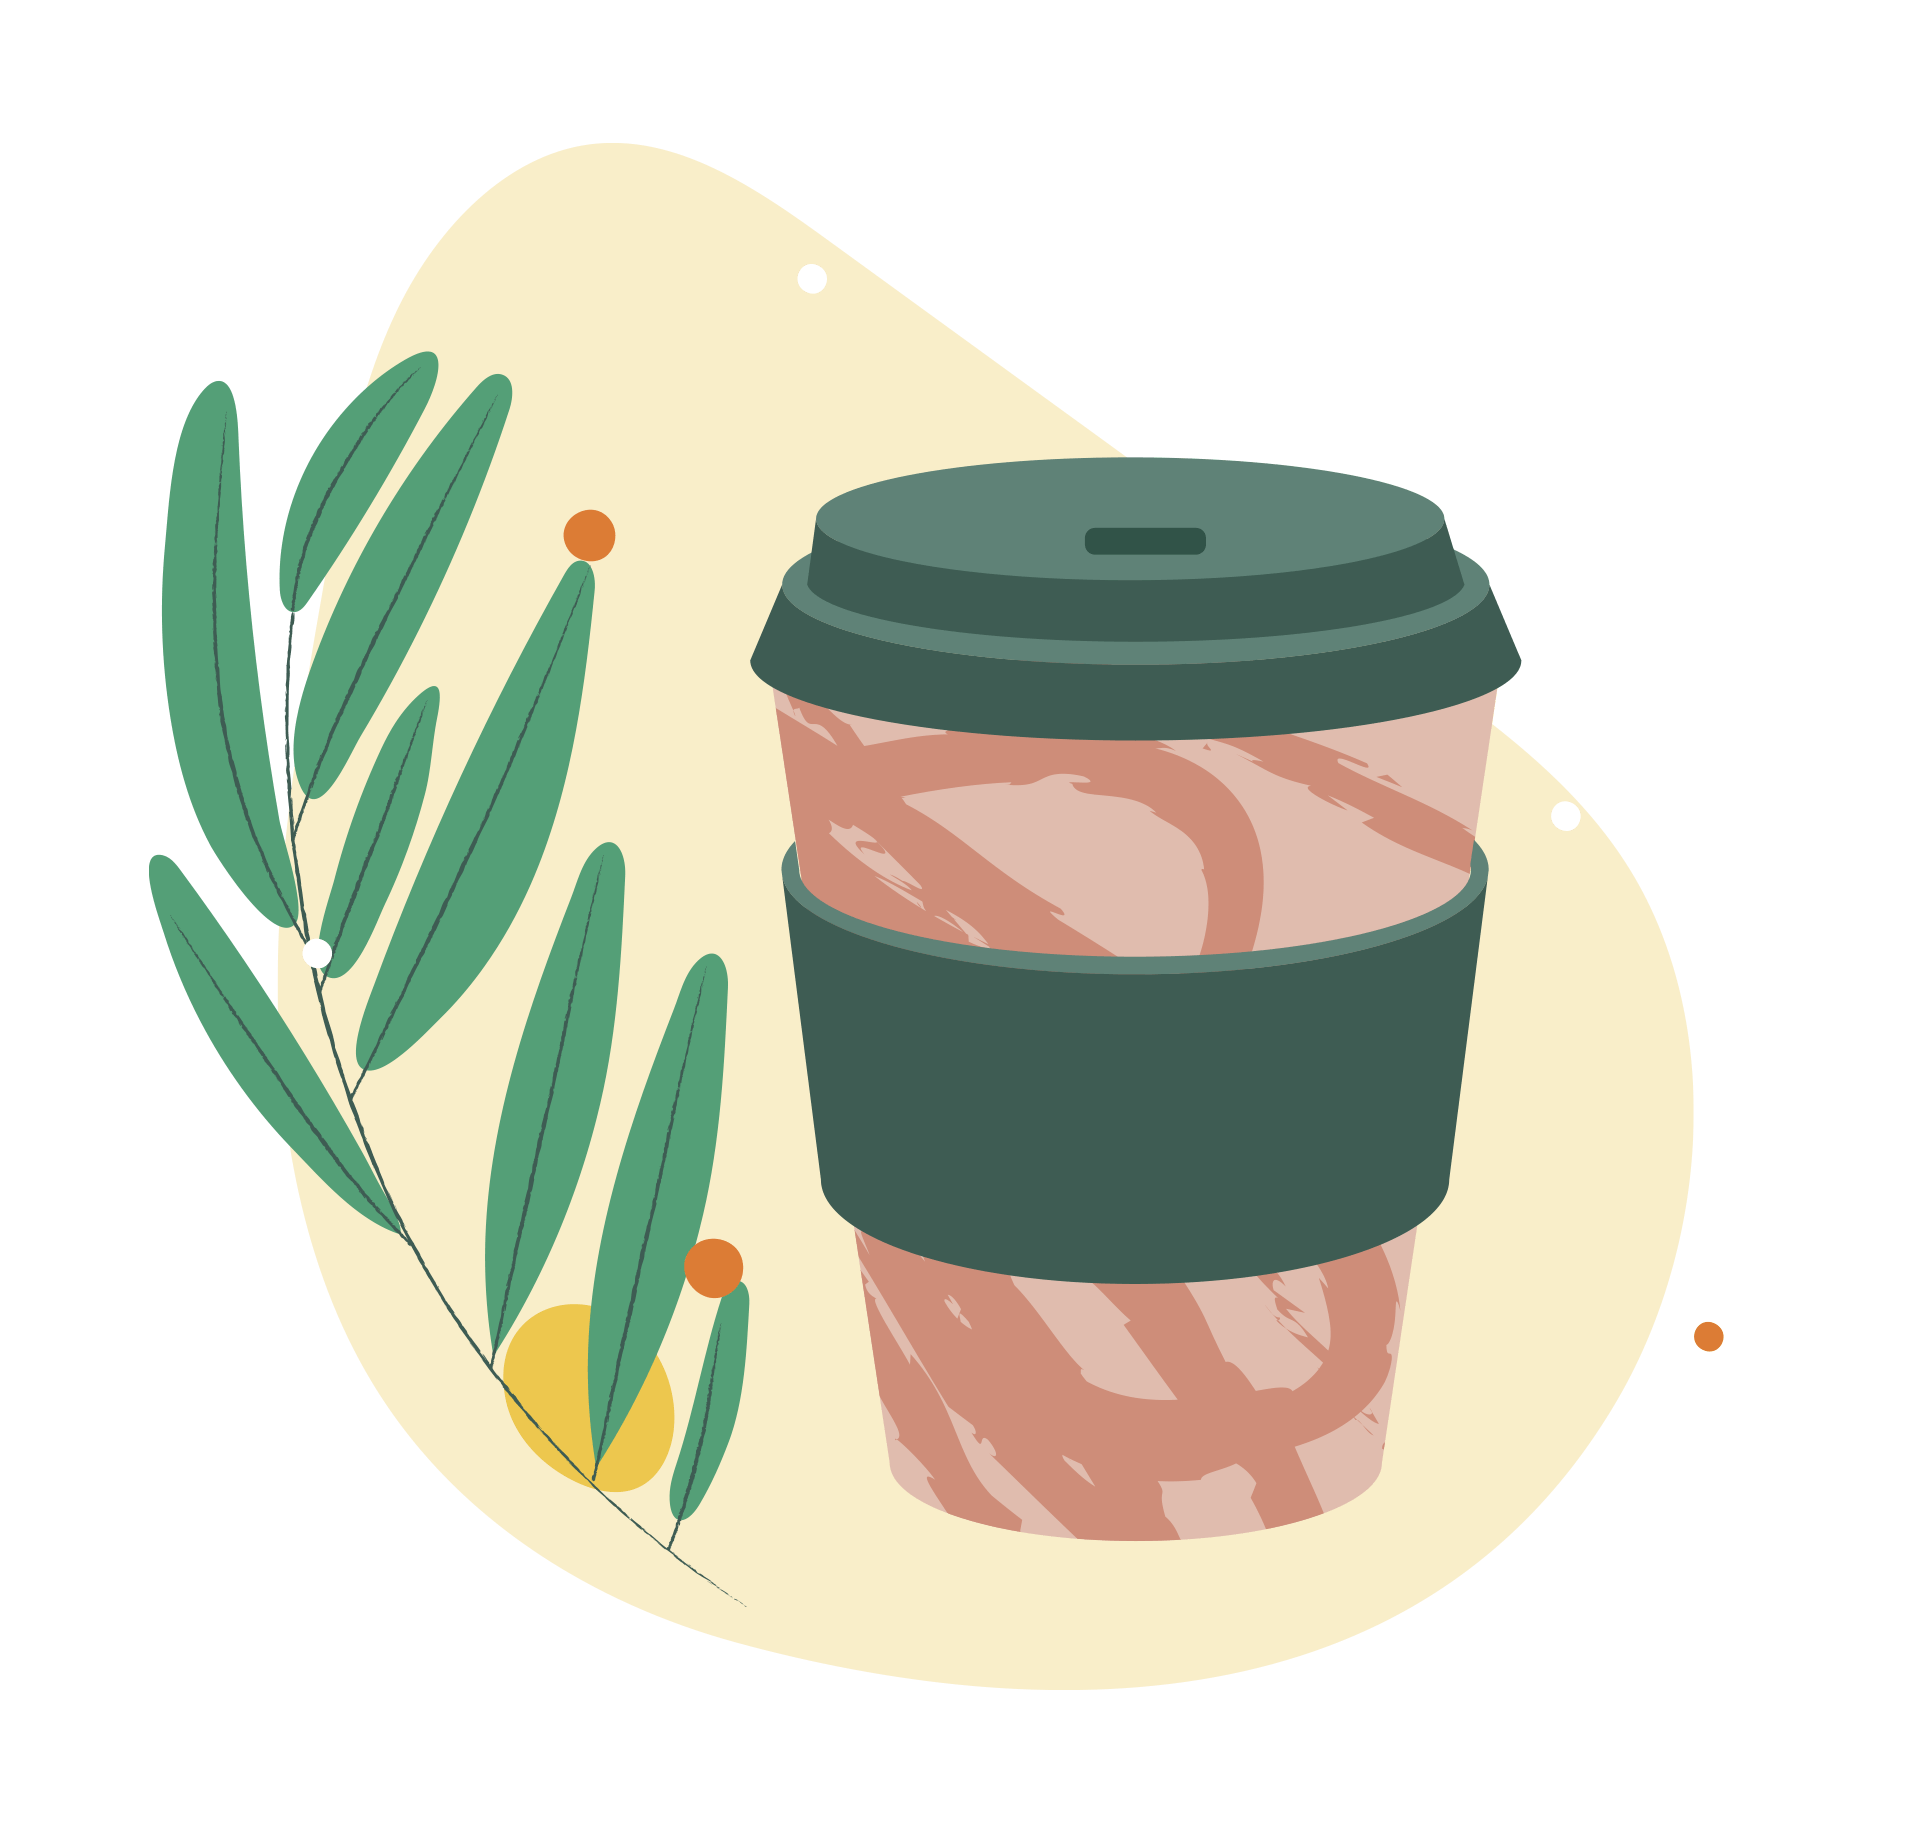 https://heartcreative.co/wp-content/uploads/2021/04/CoffeeCup-2.png